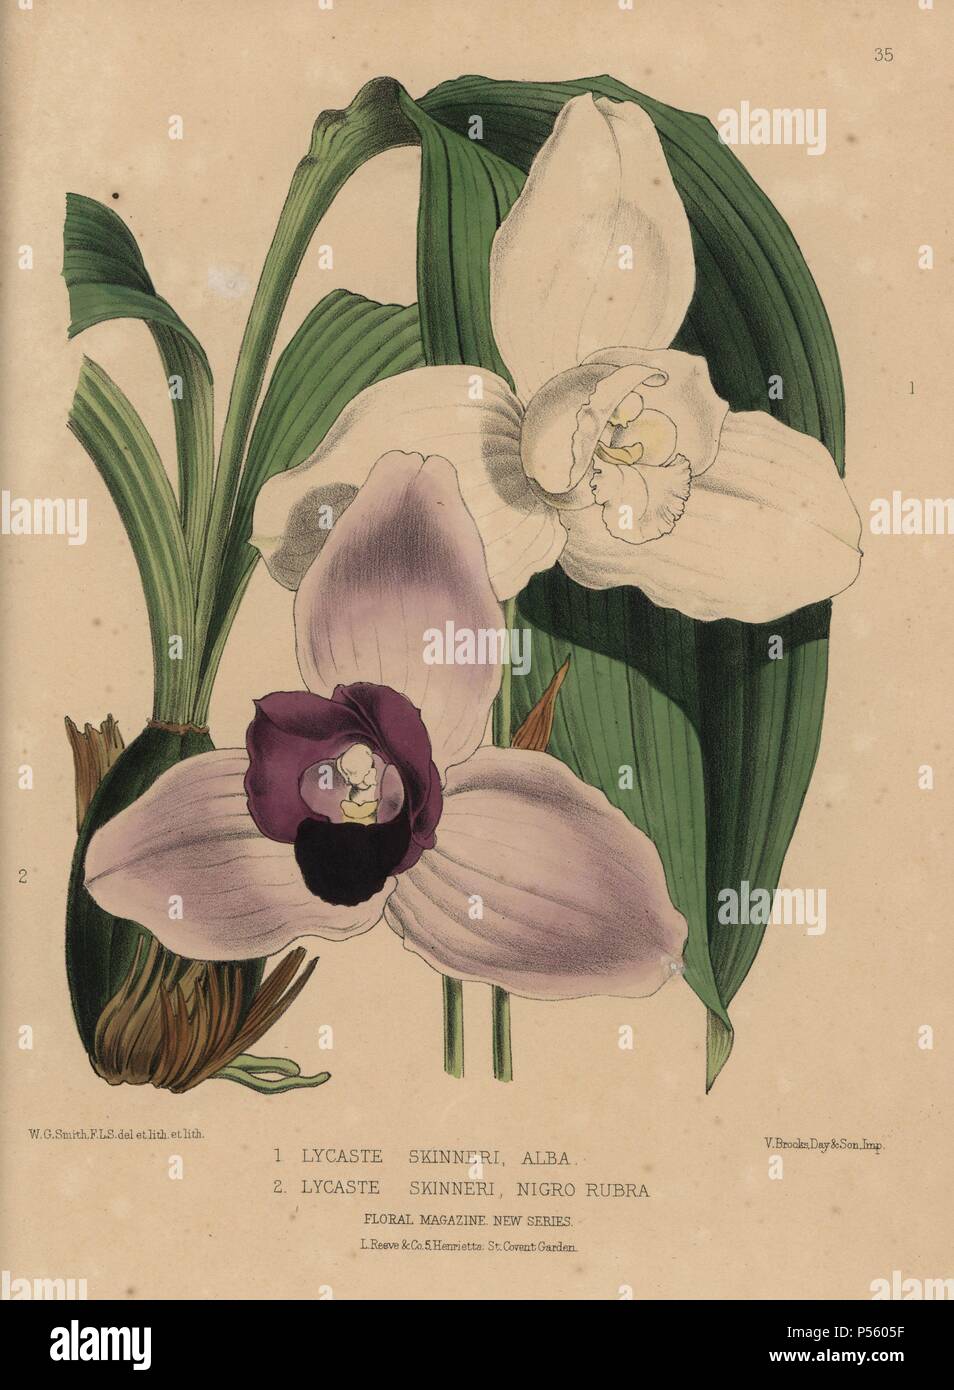 Lycaste skinneri orchids. The white Lycaste skinneri alba or Monja blanca. The purple and lilac Lycaste skinneri nigro rubra. Handcolored botanical drawn and lithographed by W.G. Smith from H.H. Dombrain's 'Floral Magazine' 1872.. Worthington G. Smith (1835-1917), architect, engraver and mycologist. Smith also illustrated 'The Gardener's Chronicle.' Henry Honywood Dombrain (1818-1905), clergyman gardener, was editor of the 'Floral Magazine' from 1862 to 1873. Stock Photo